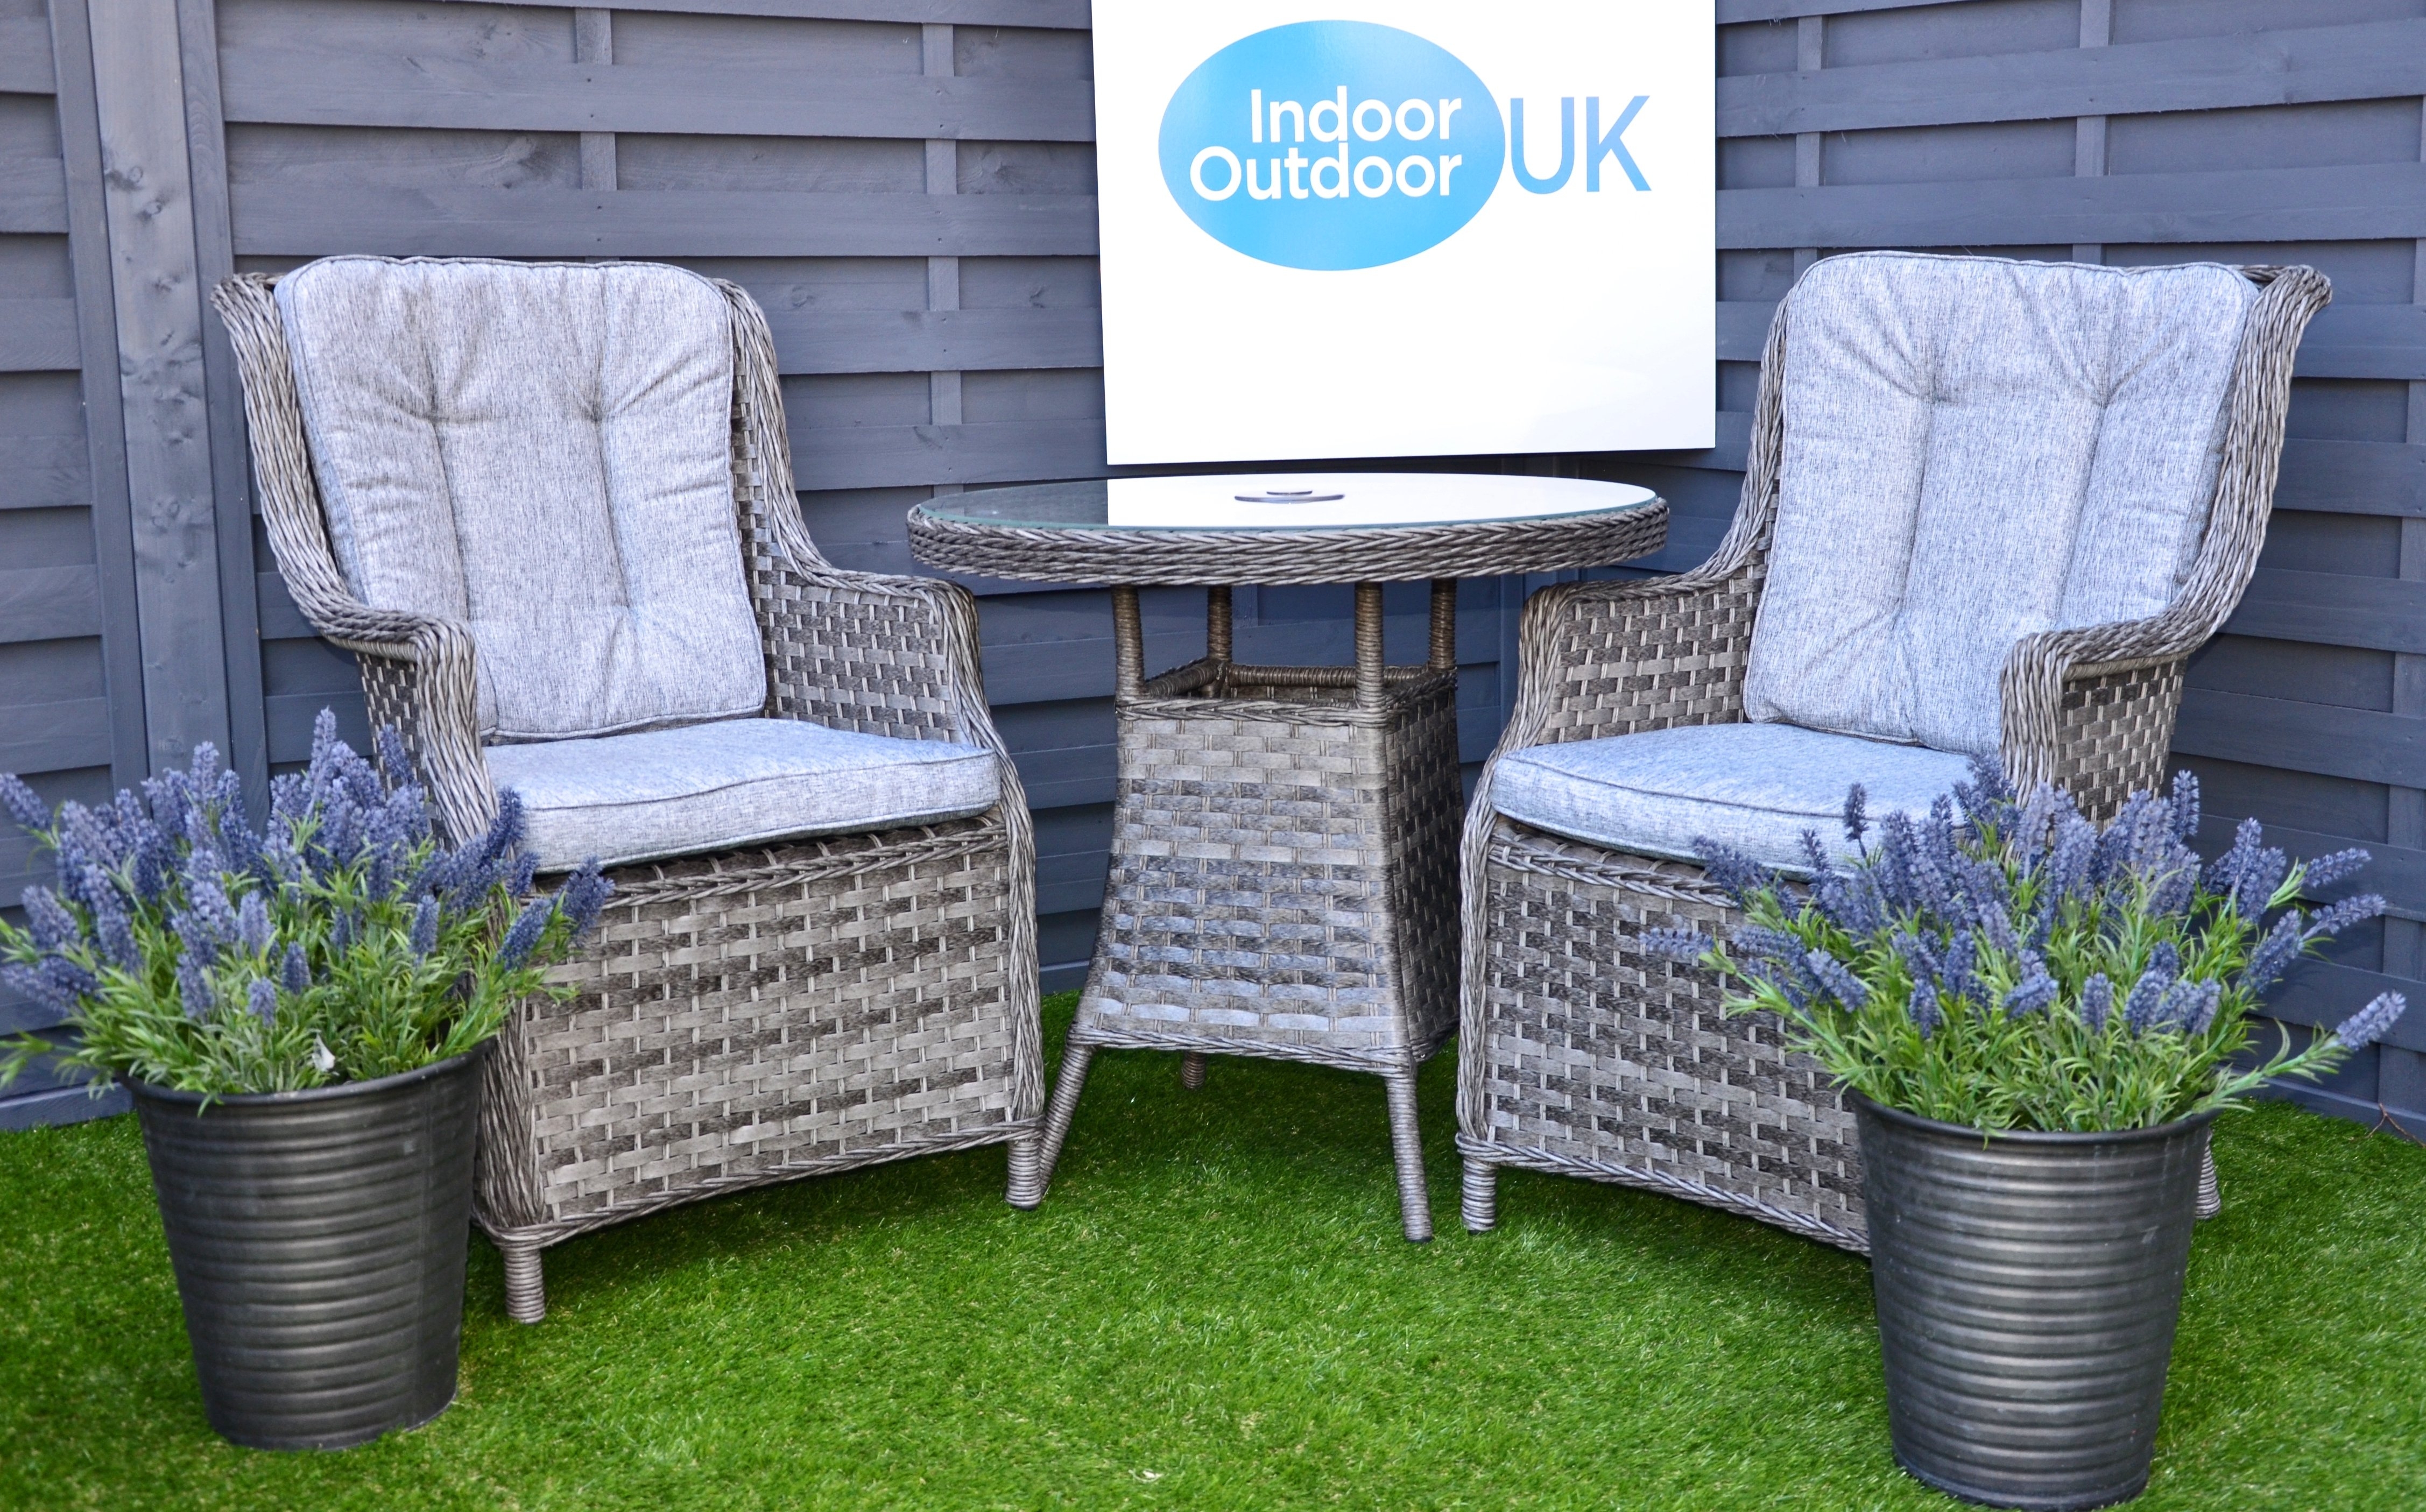 Hatherton 2 Seat Rattan Bistro Set In Grey AVAILABILITY 15th JULY – GLASS TABLE TOP (Grey) Back in stock July